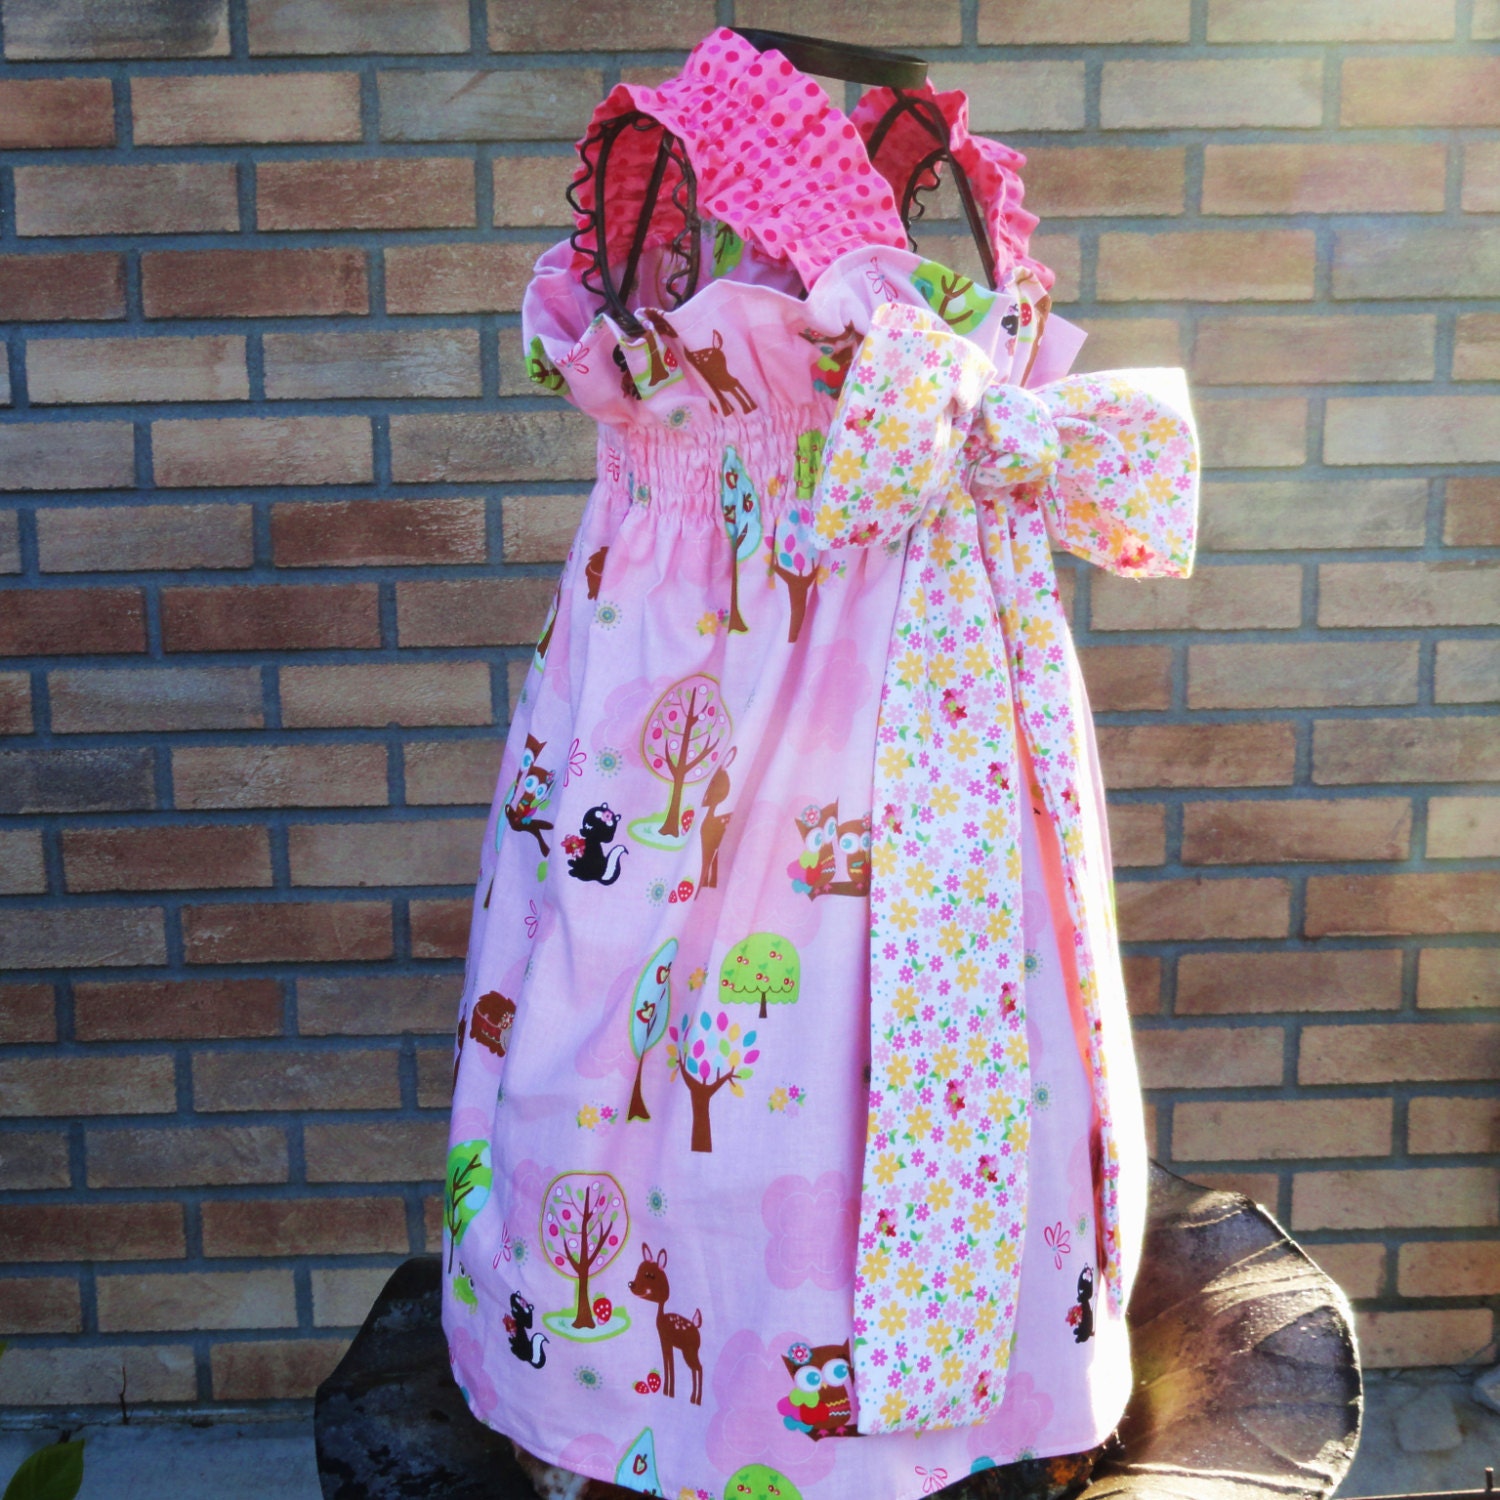 Forest Fun Summer Sundress Gathered Bow Dress for Girls 12m 18m 24m 2T 3T 4T 5 6